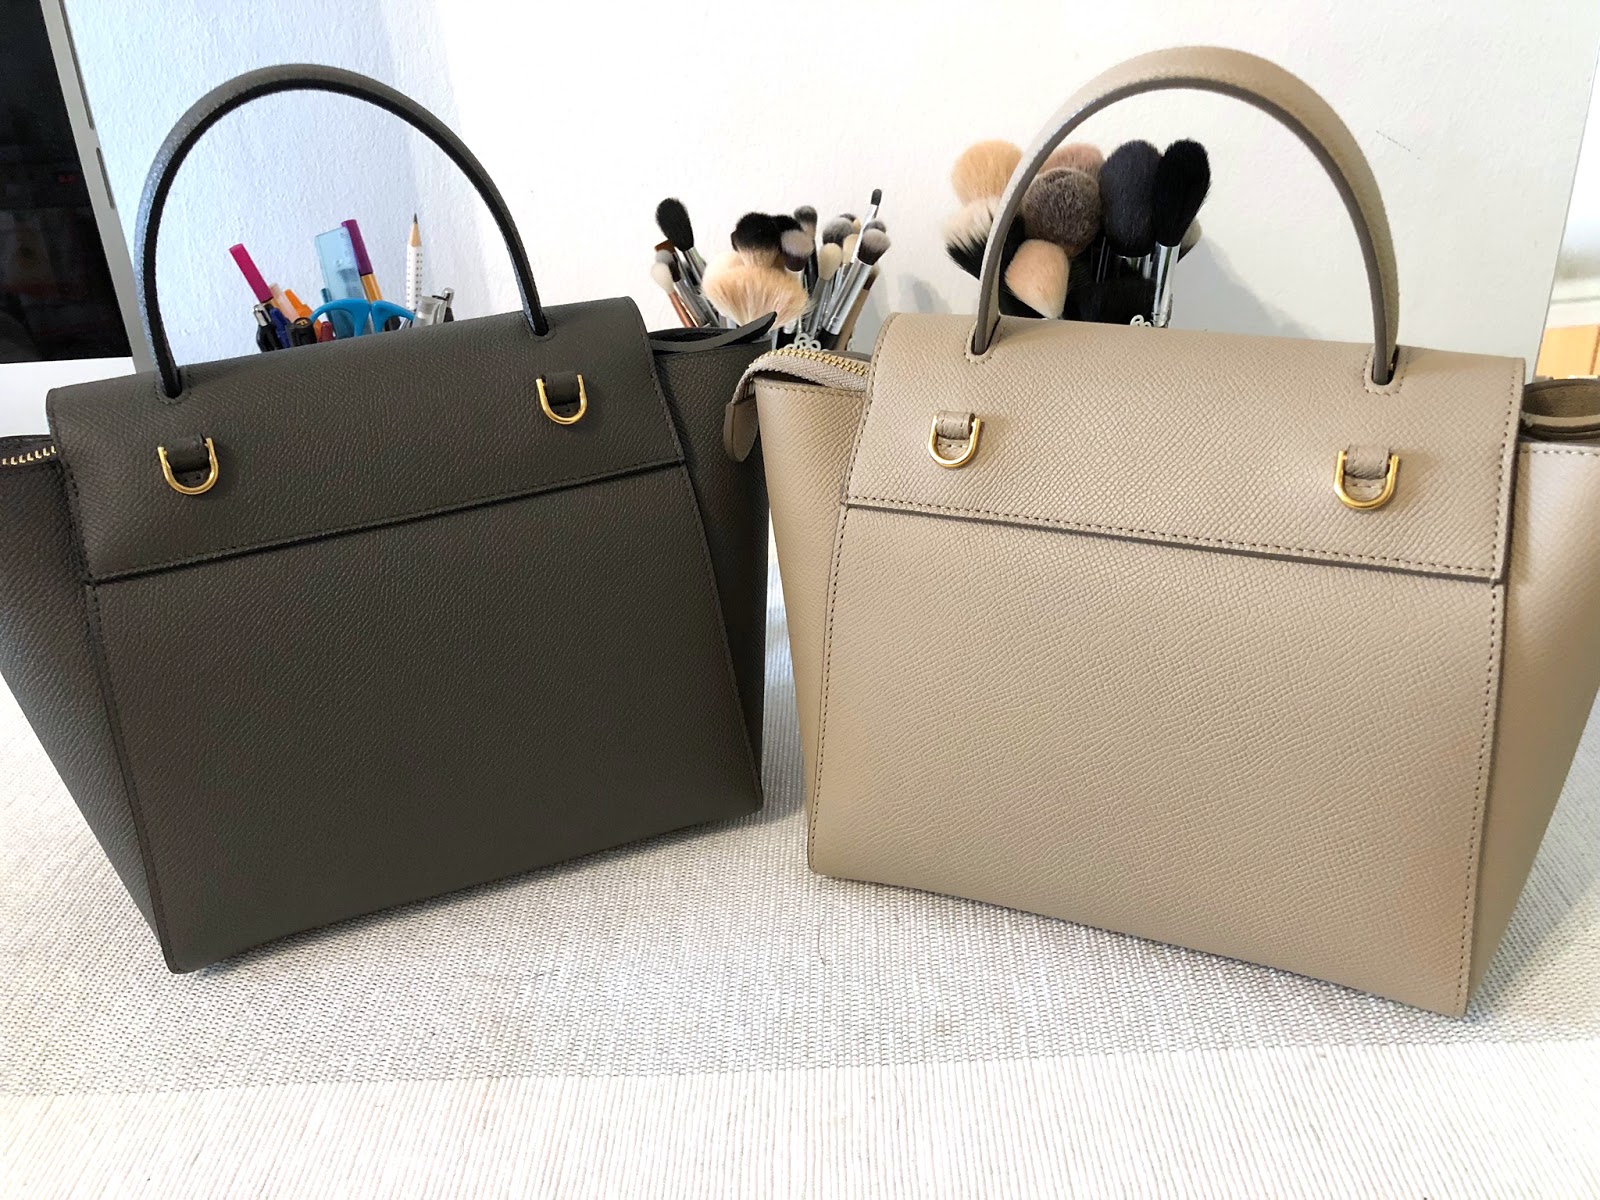 My Celine nano belt bag in light taupe goes with just about everything! : r/ handbags